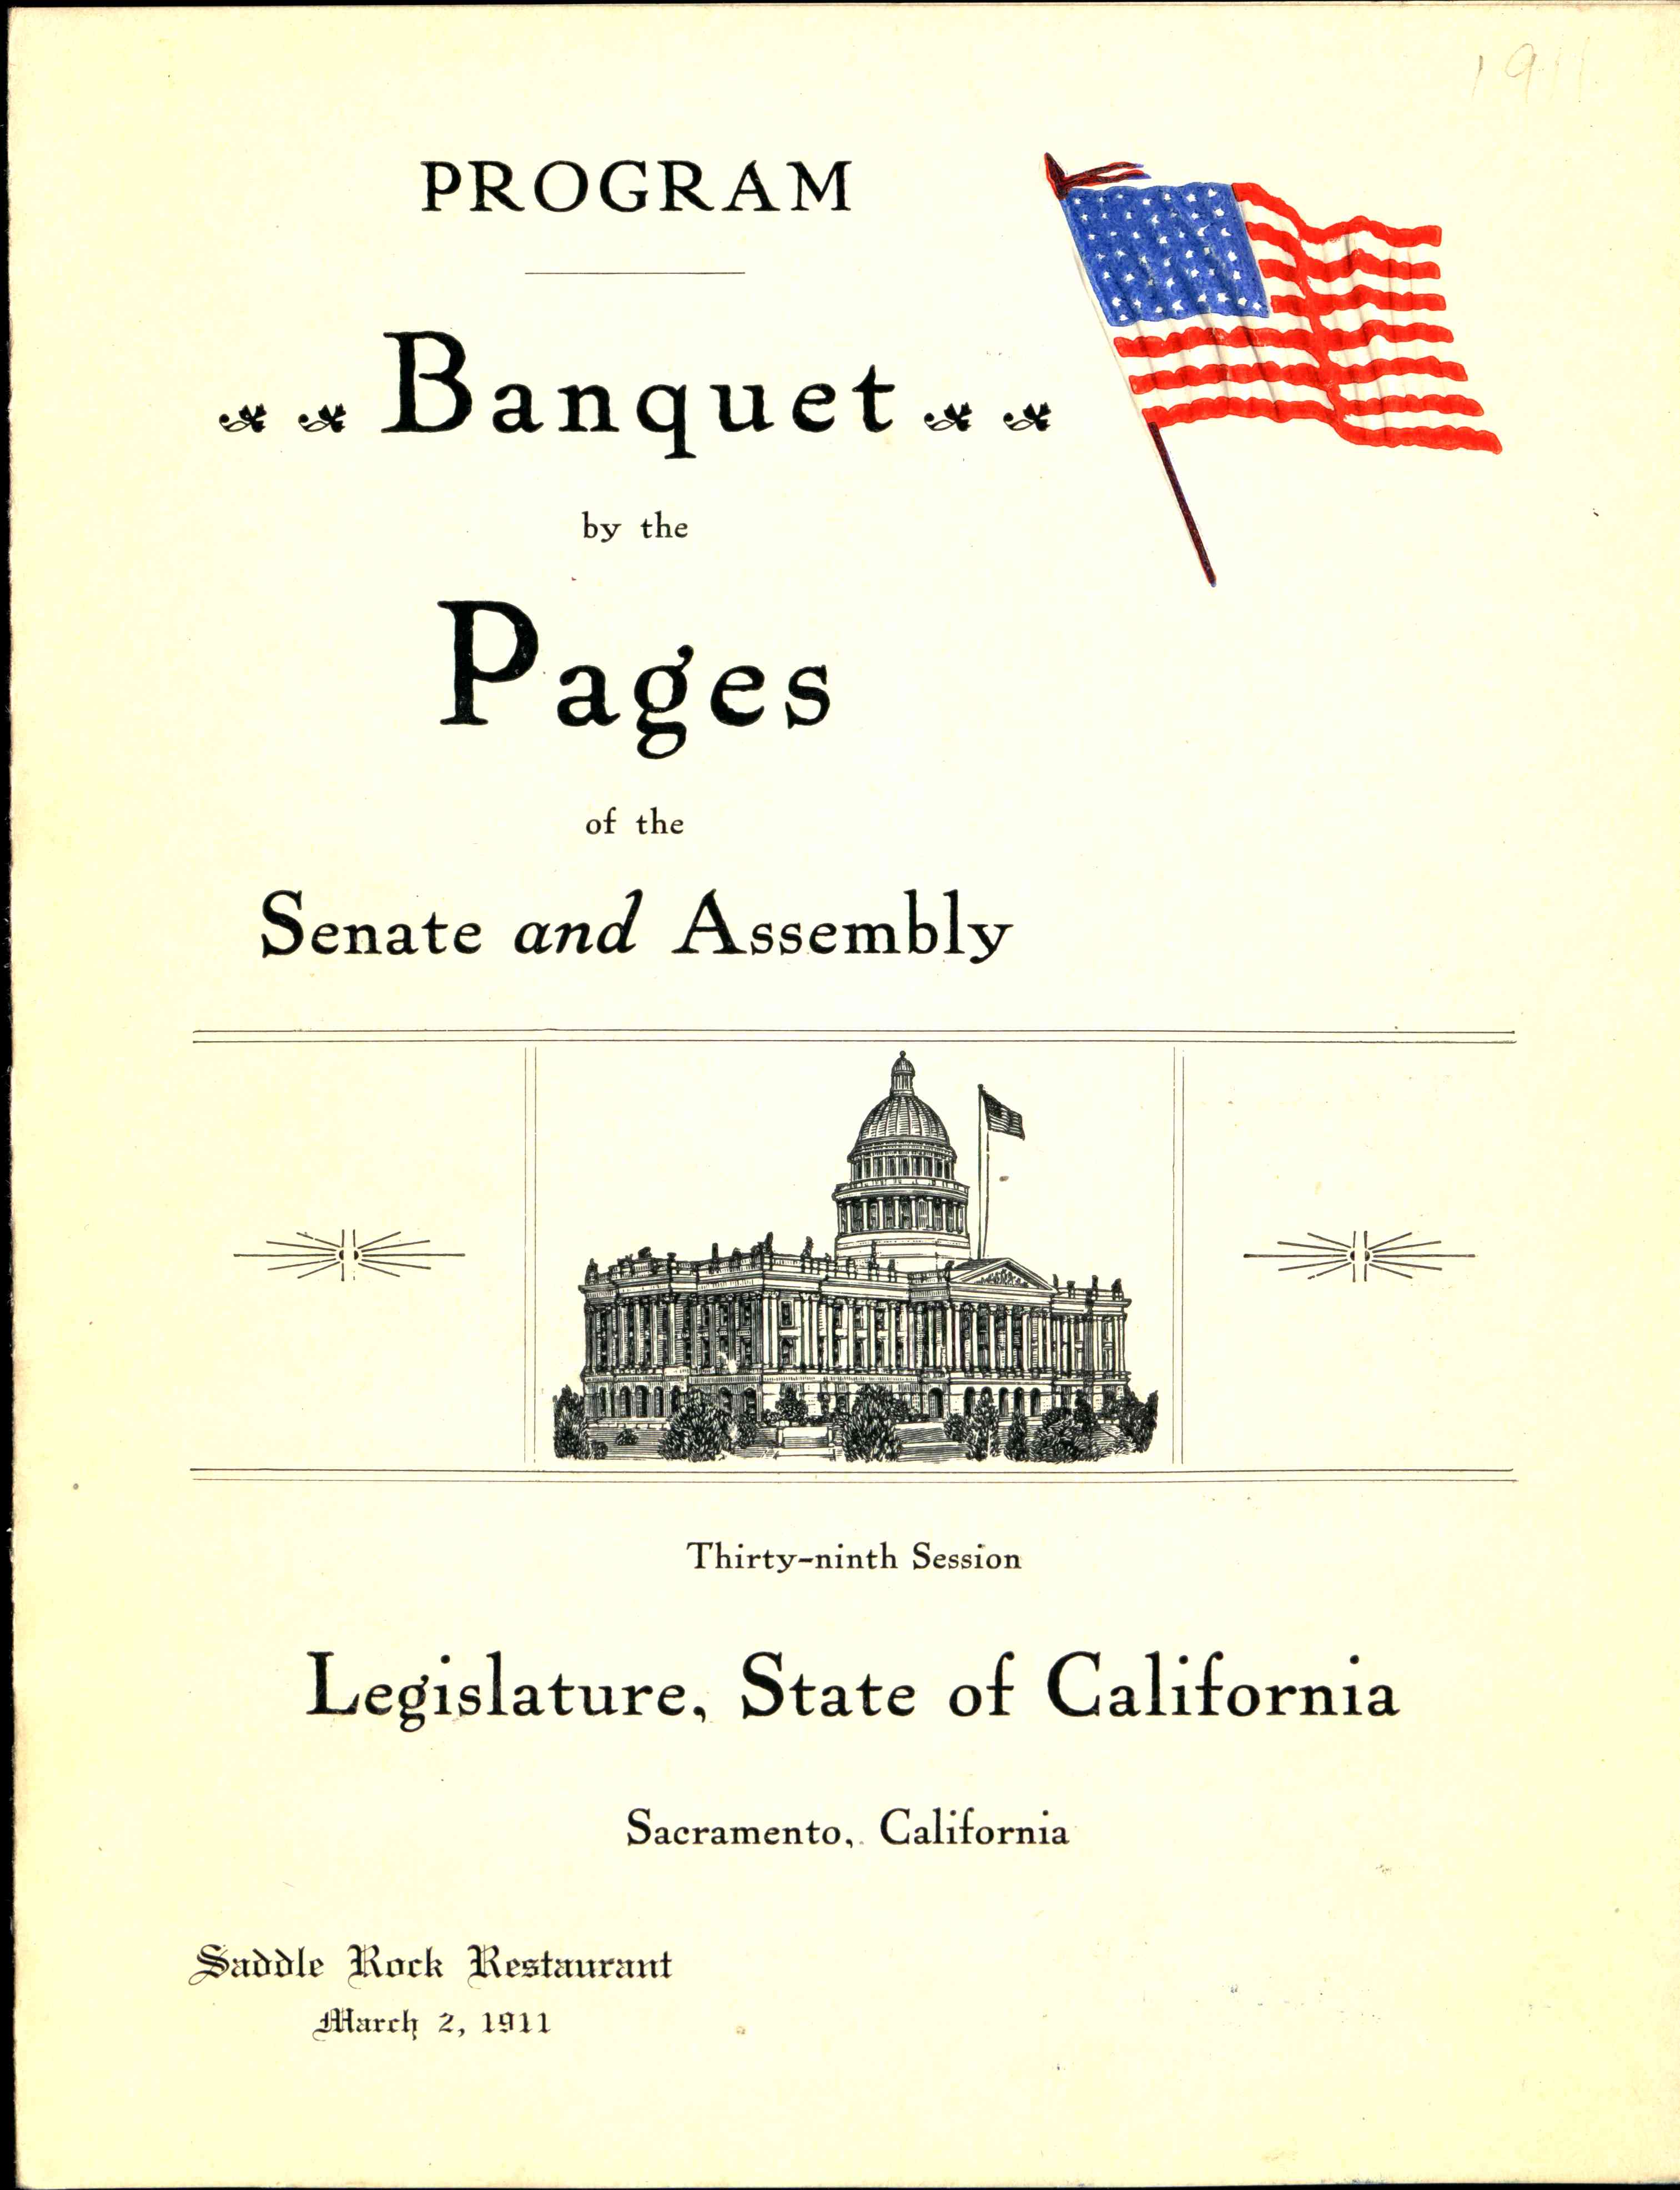 Banquet by the Pages of the Senate and Assembly